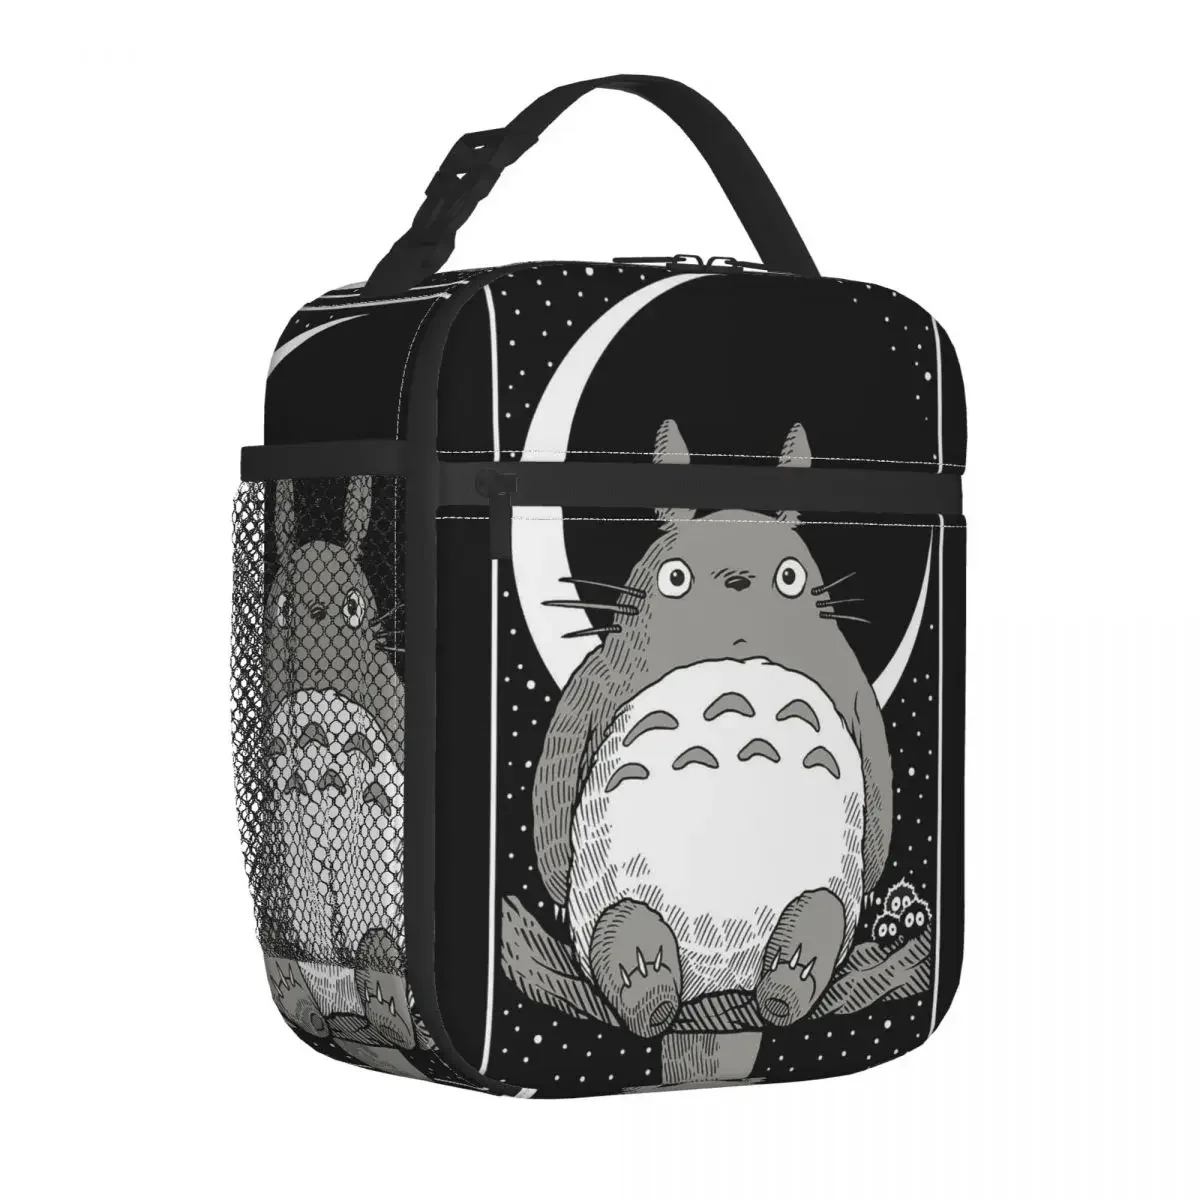 

2020 Totoro Insulated Lunch Bag Leakproof Meal Container Cooler Bag Lunch Box Tote Office Picnic Food Bag